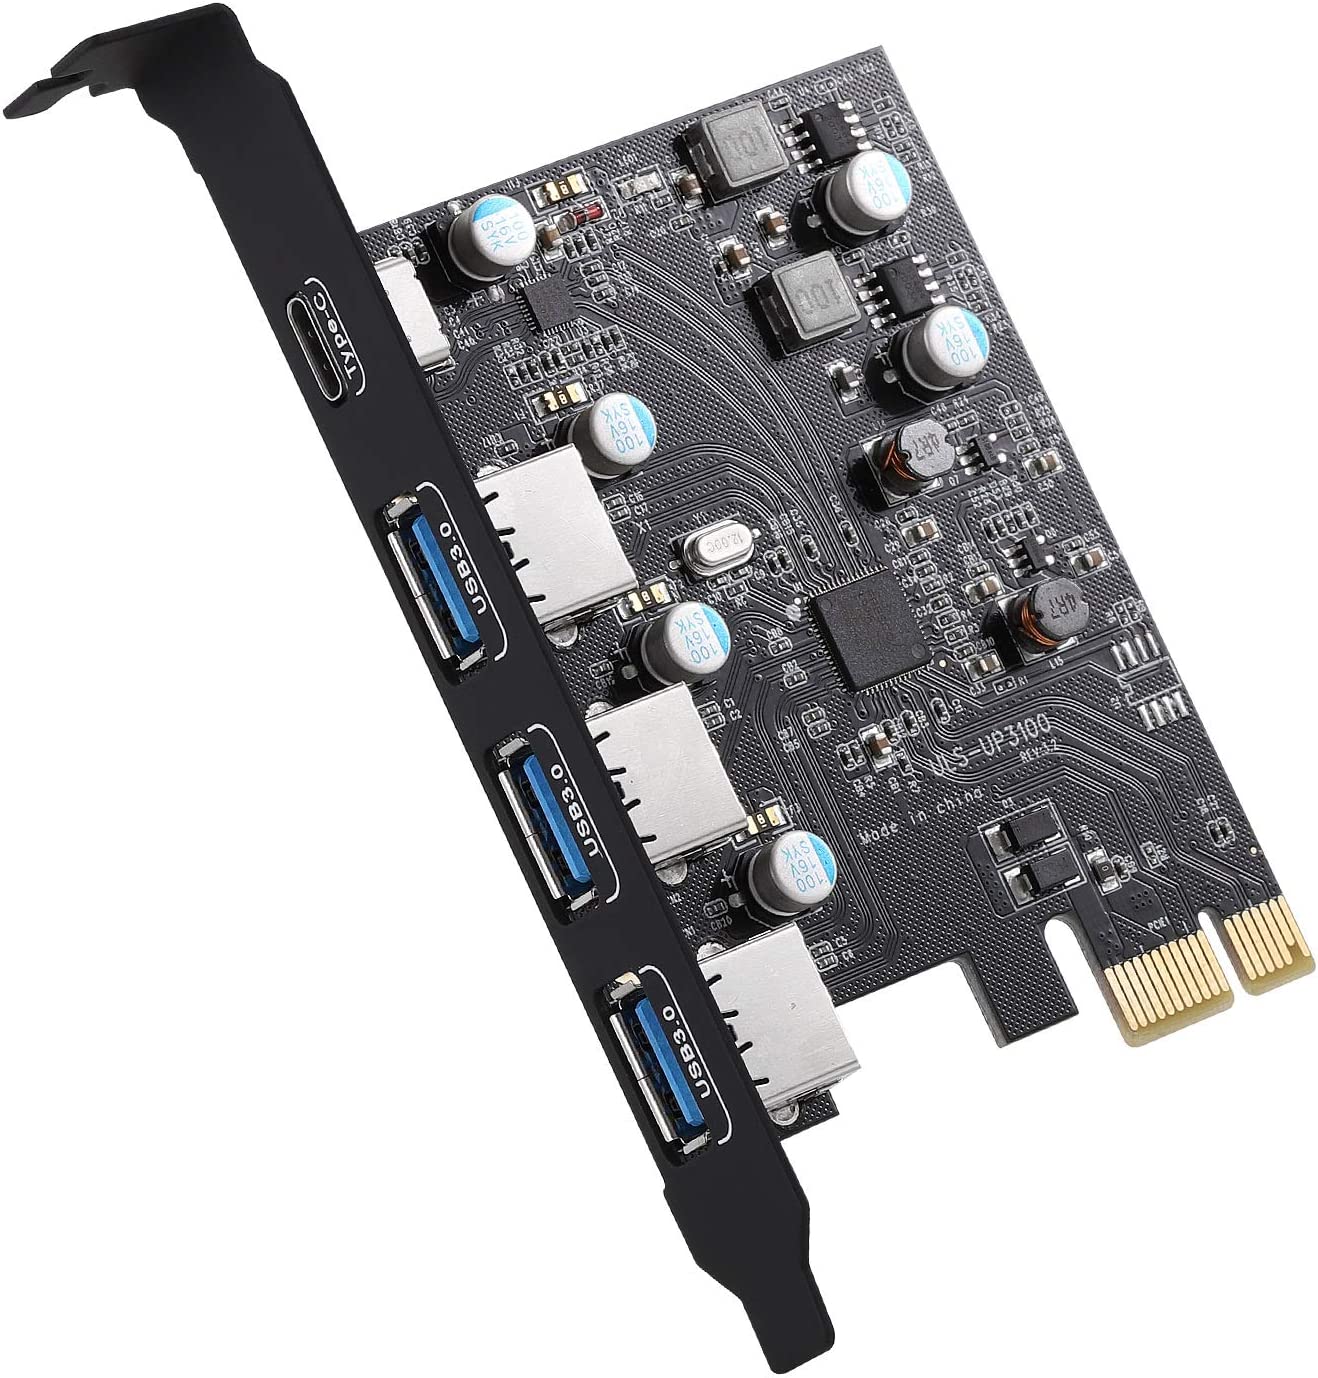 USB 3.1 Type-A & Type C MAC PRO PCIe Card - Plug and Play!! Supports 3,1 4,1 5,1